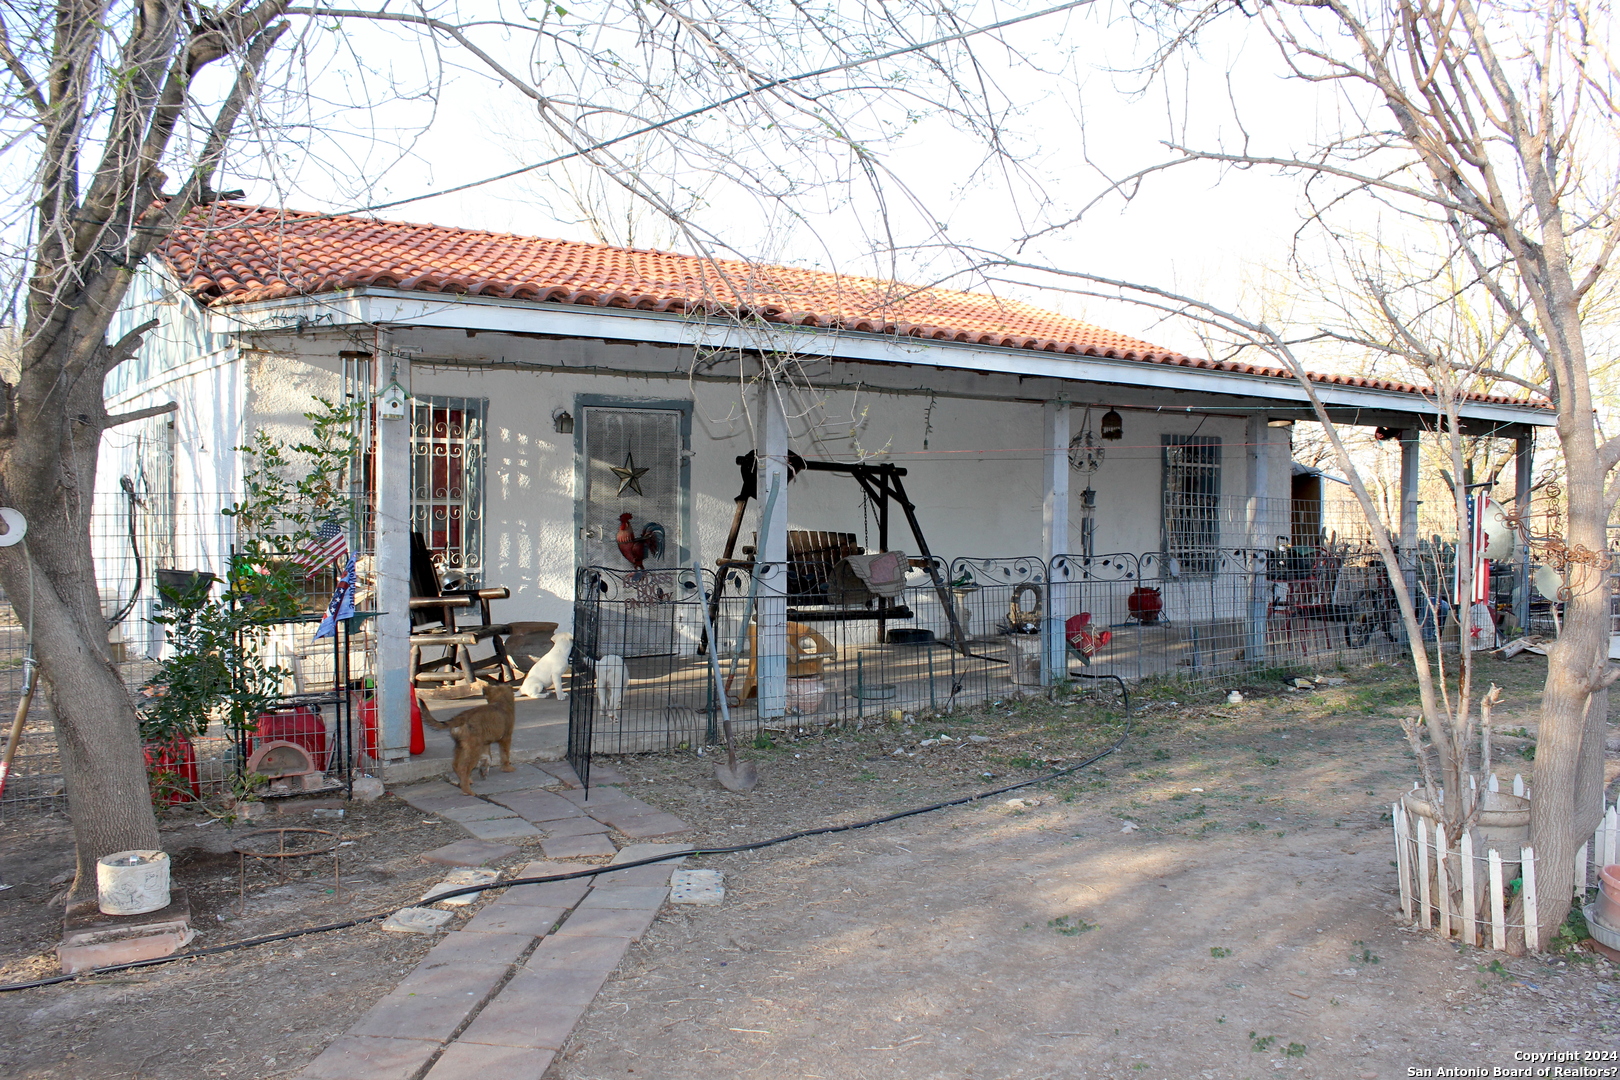 a view of a house with patio